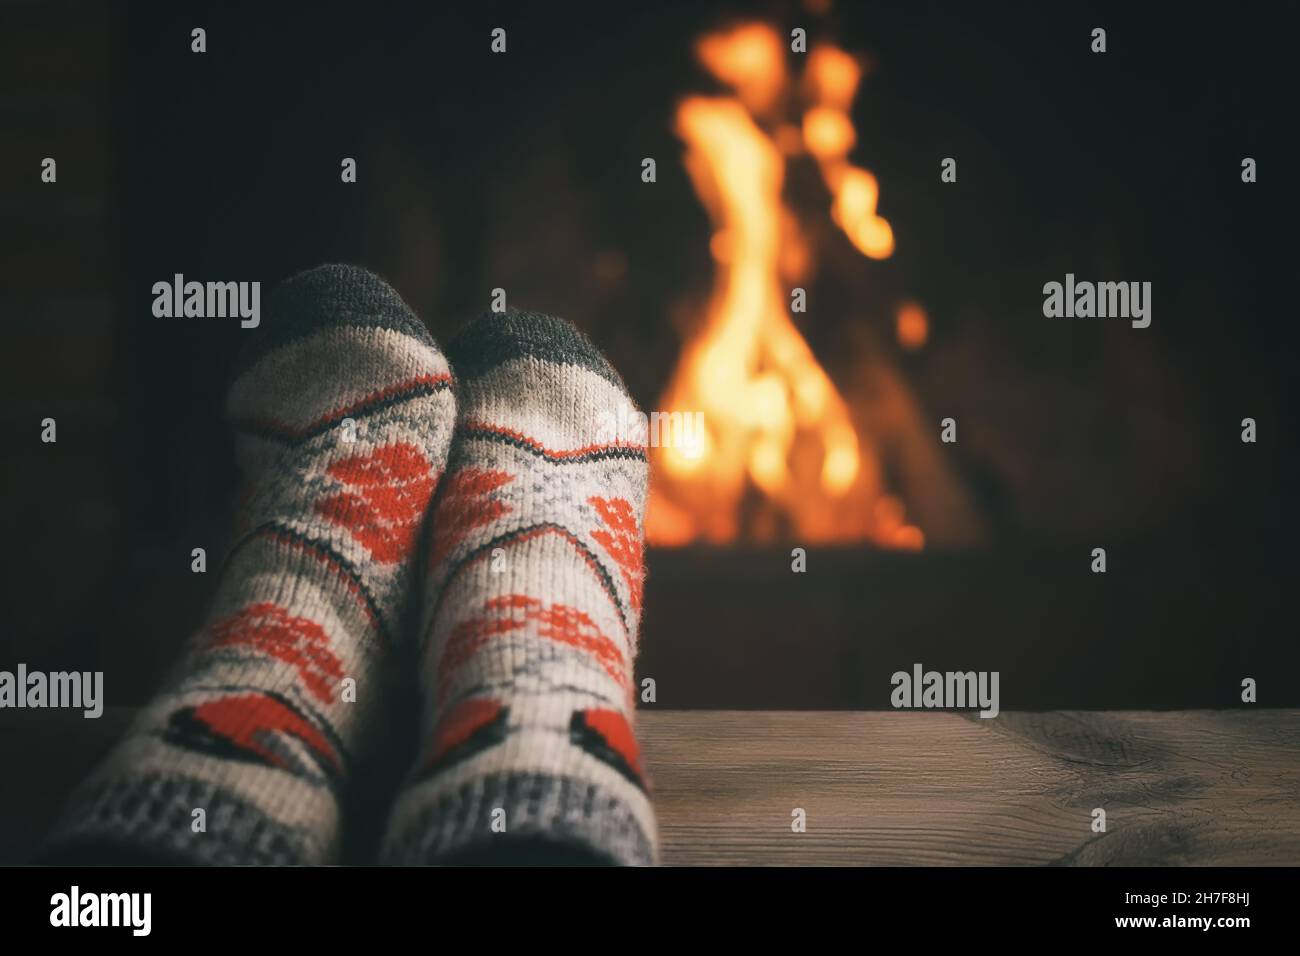 Girl resting and warming her feet by a burning fireplace in a country house on a winter evening. Stock Photo